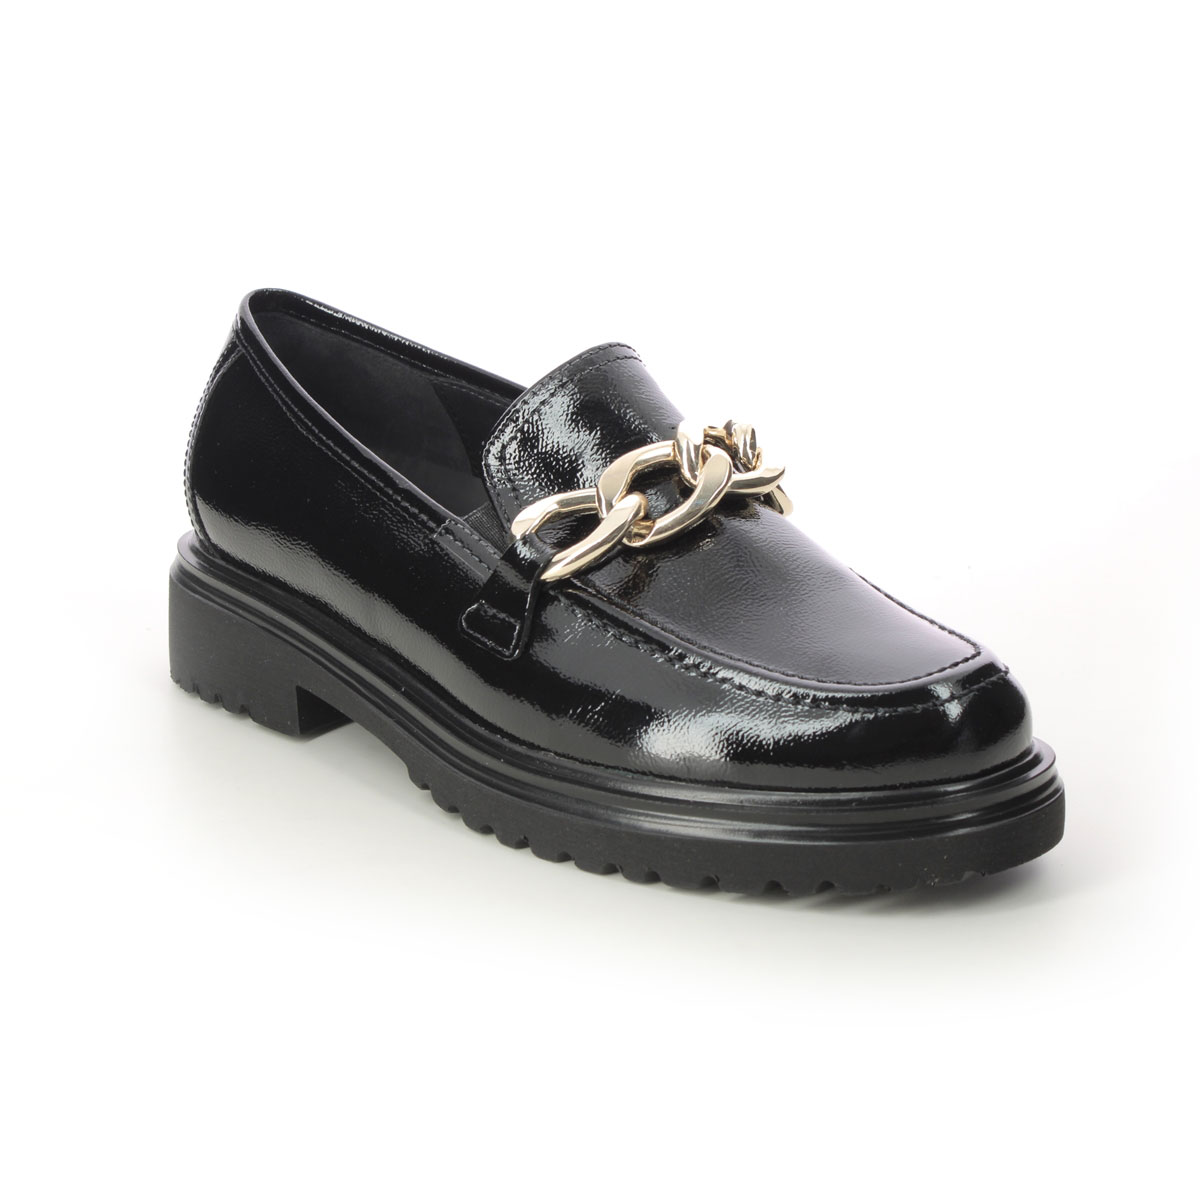 Gabor Florida H Black Patent Womens Loafers 92.554.97 In Size 7 In Plain Black Patent  Womens Comfort Slip On Shoes In Soft Black Patent Leather